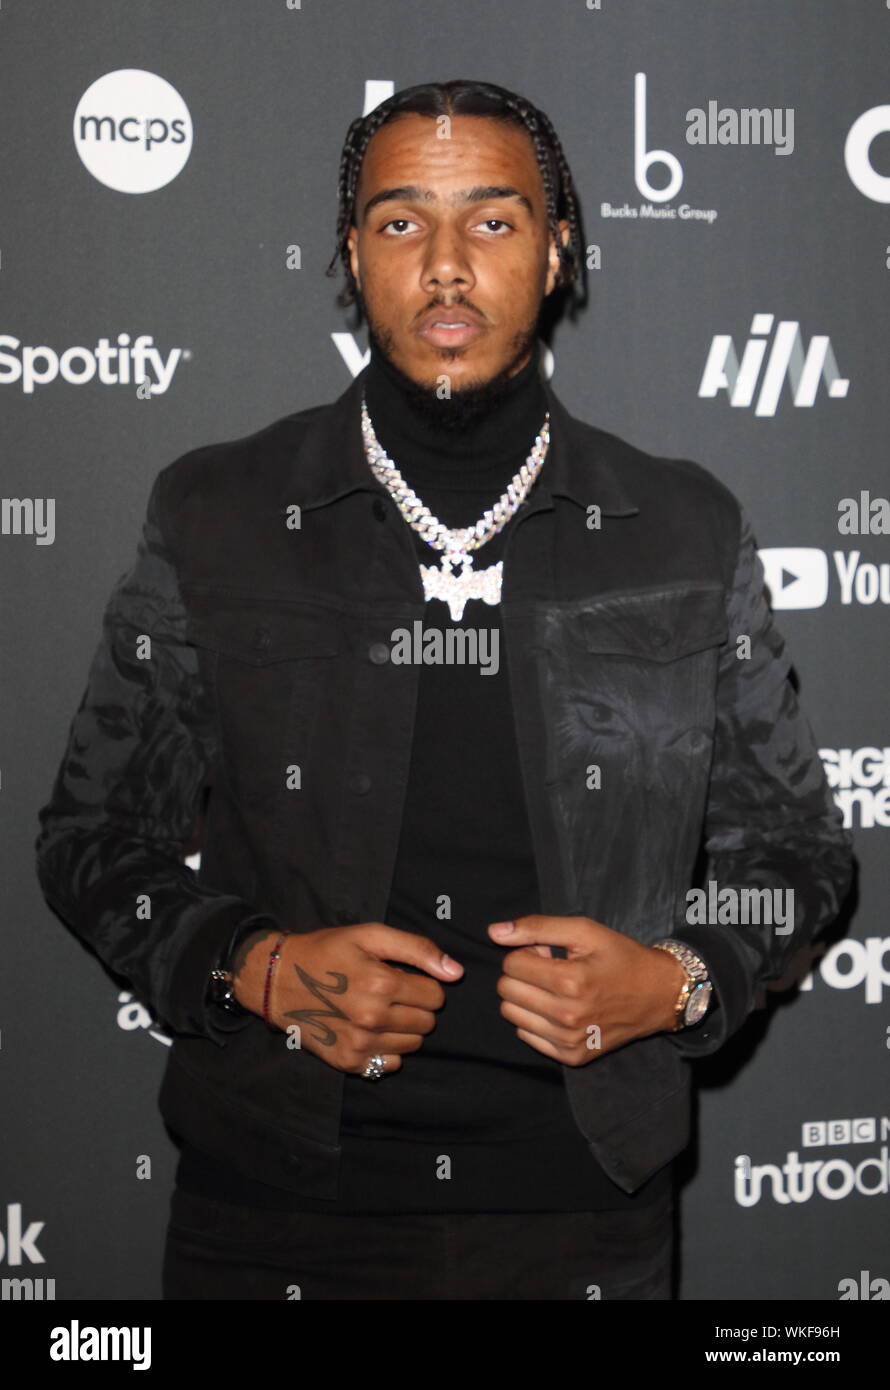 Rapper AJ Tracey on the red carpet arrivals board during the AIM Independent Music Awards 2019 held at the Roundhouse in London. Stock Photo